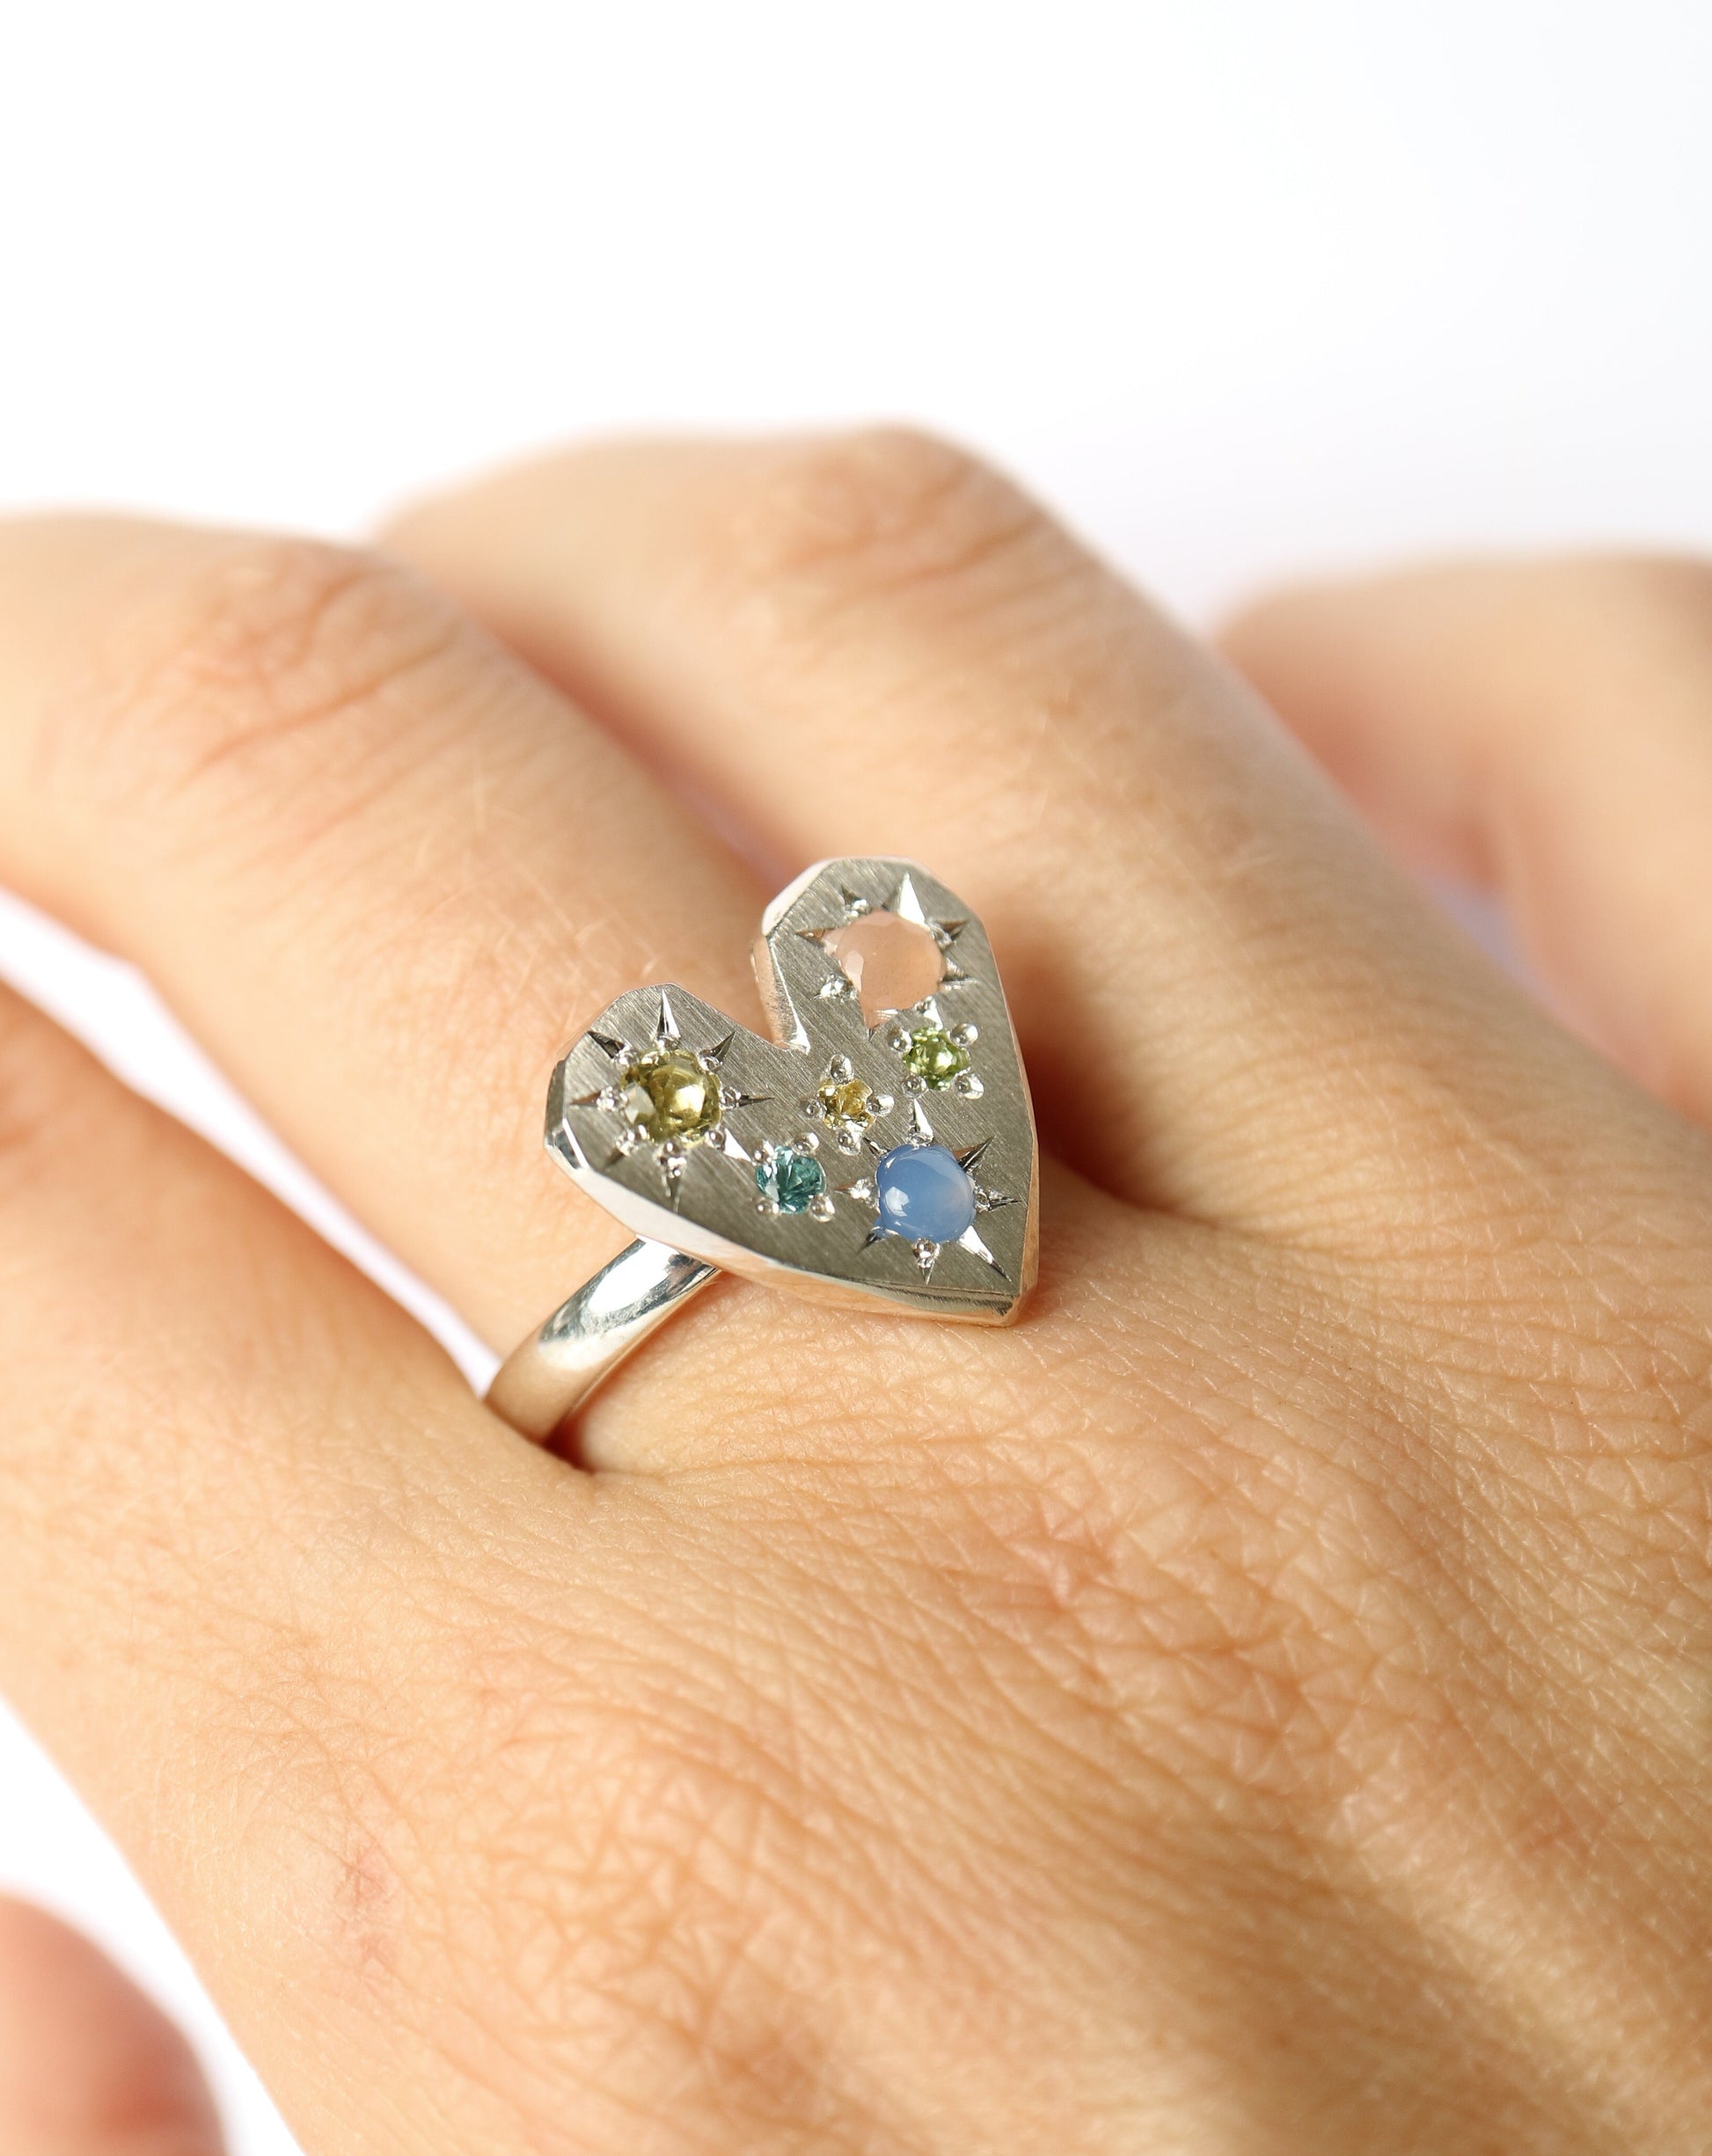 Stargazer Large Heart Ring – Collective &